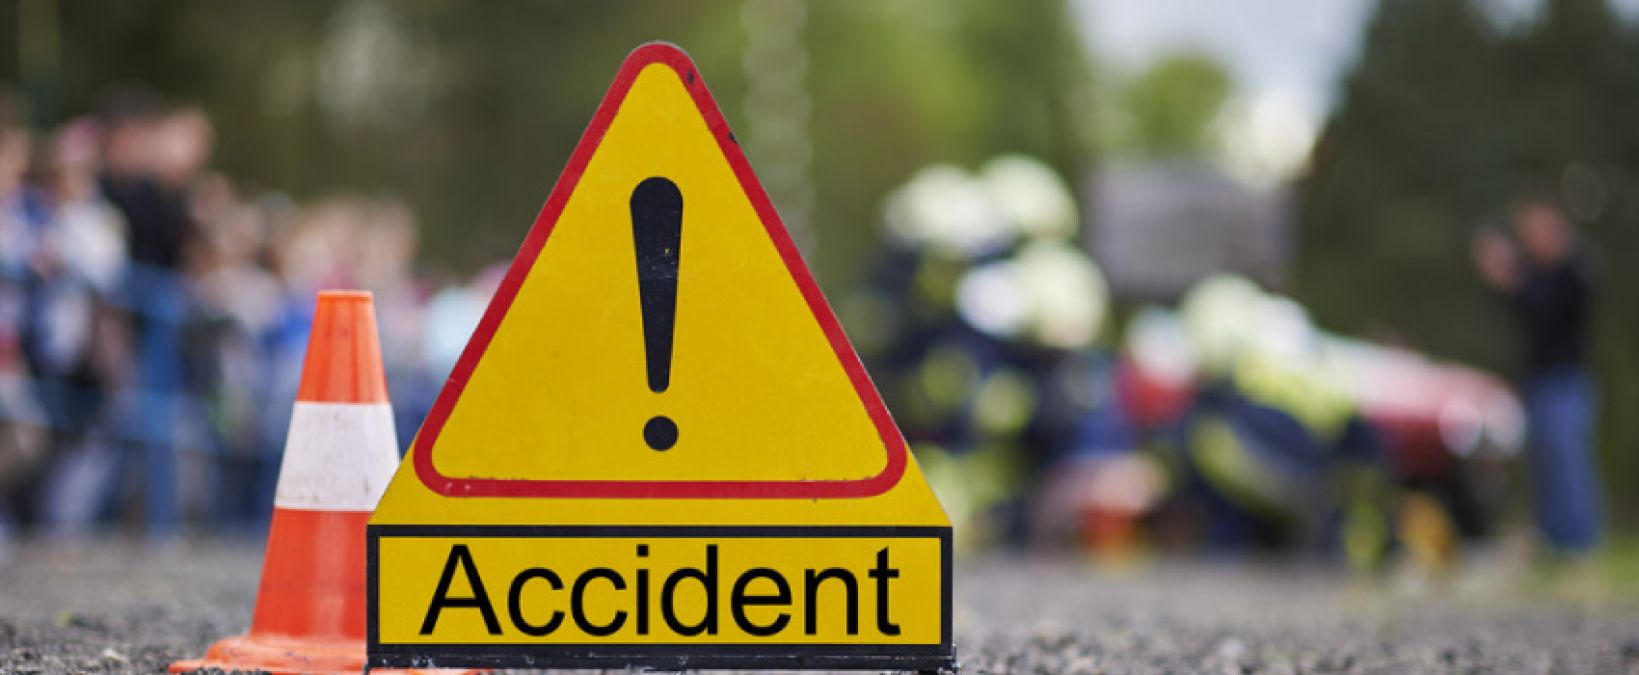 One killed, several injured in a road accident in Katihar